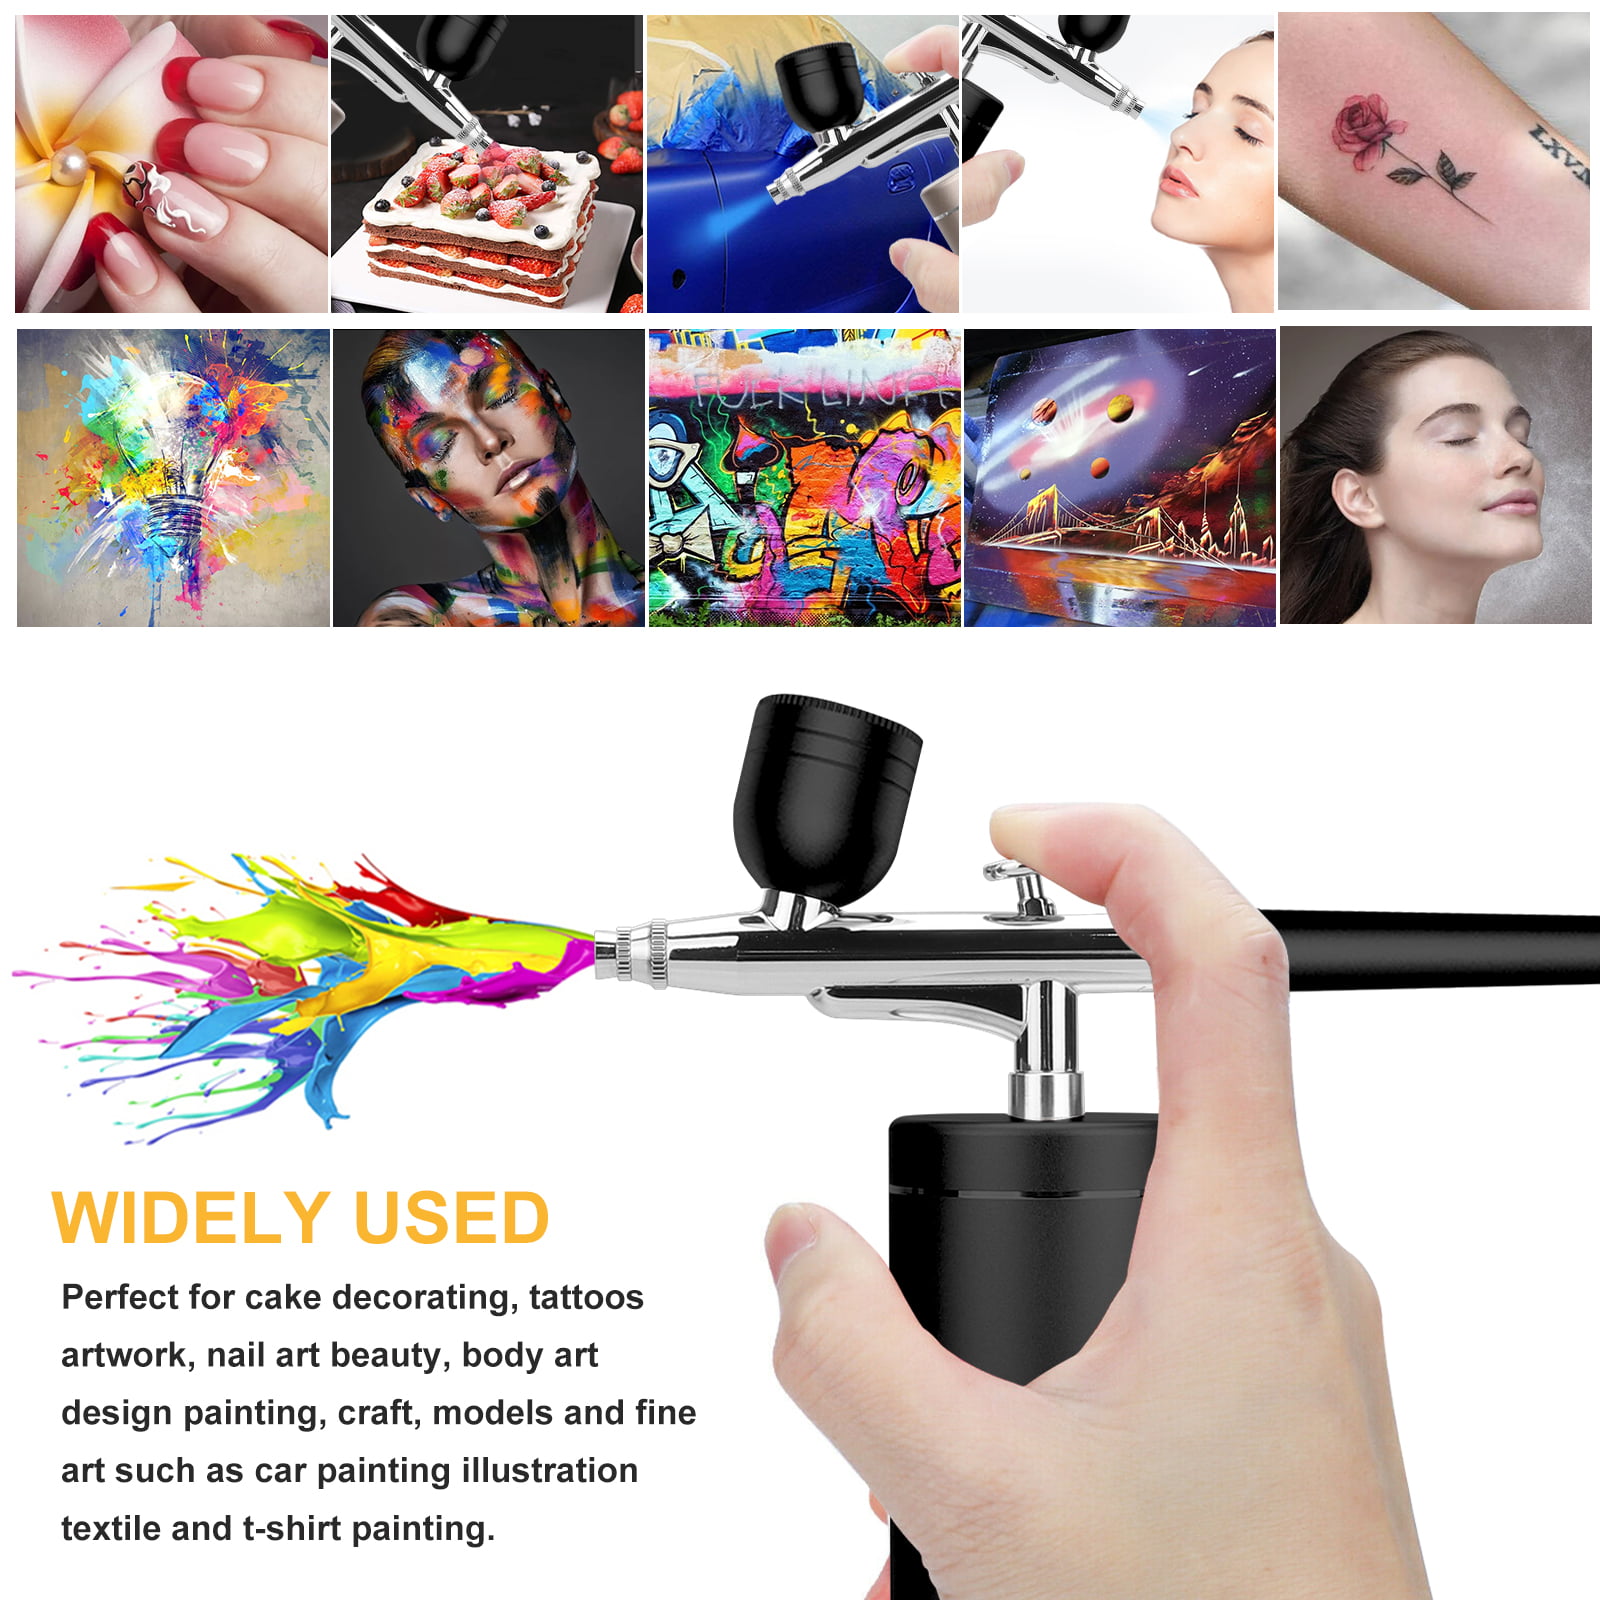 Mildhug Cordless Airbrush Kit Rechargeable Airbrush Compressor 20-27PCI for Art Paintingcake Airbrush Decorating Crafts Model Painting Air Brush Paint